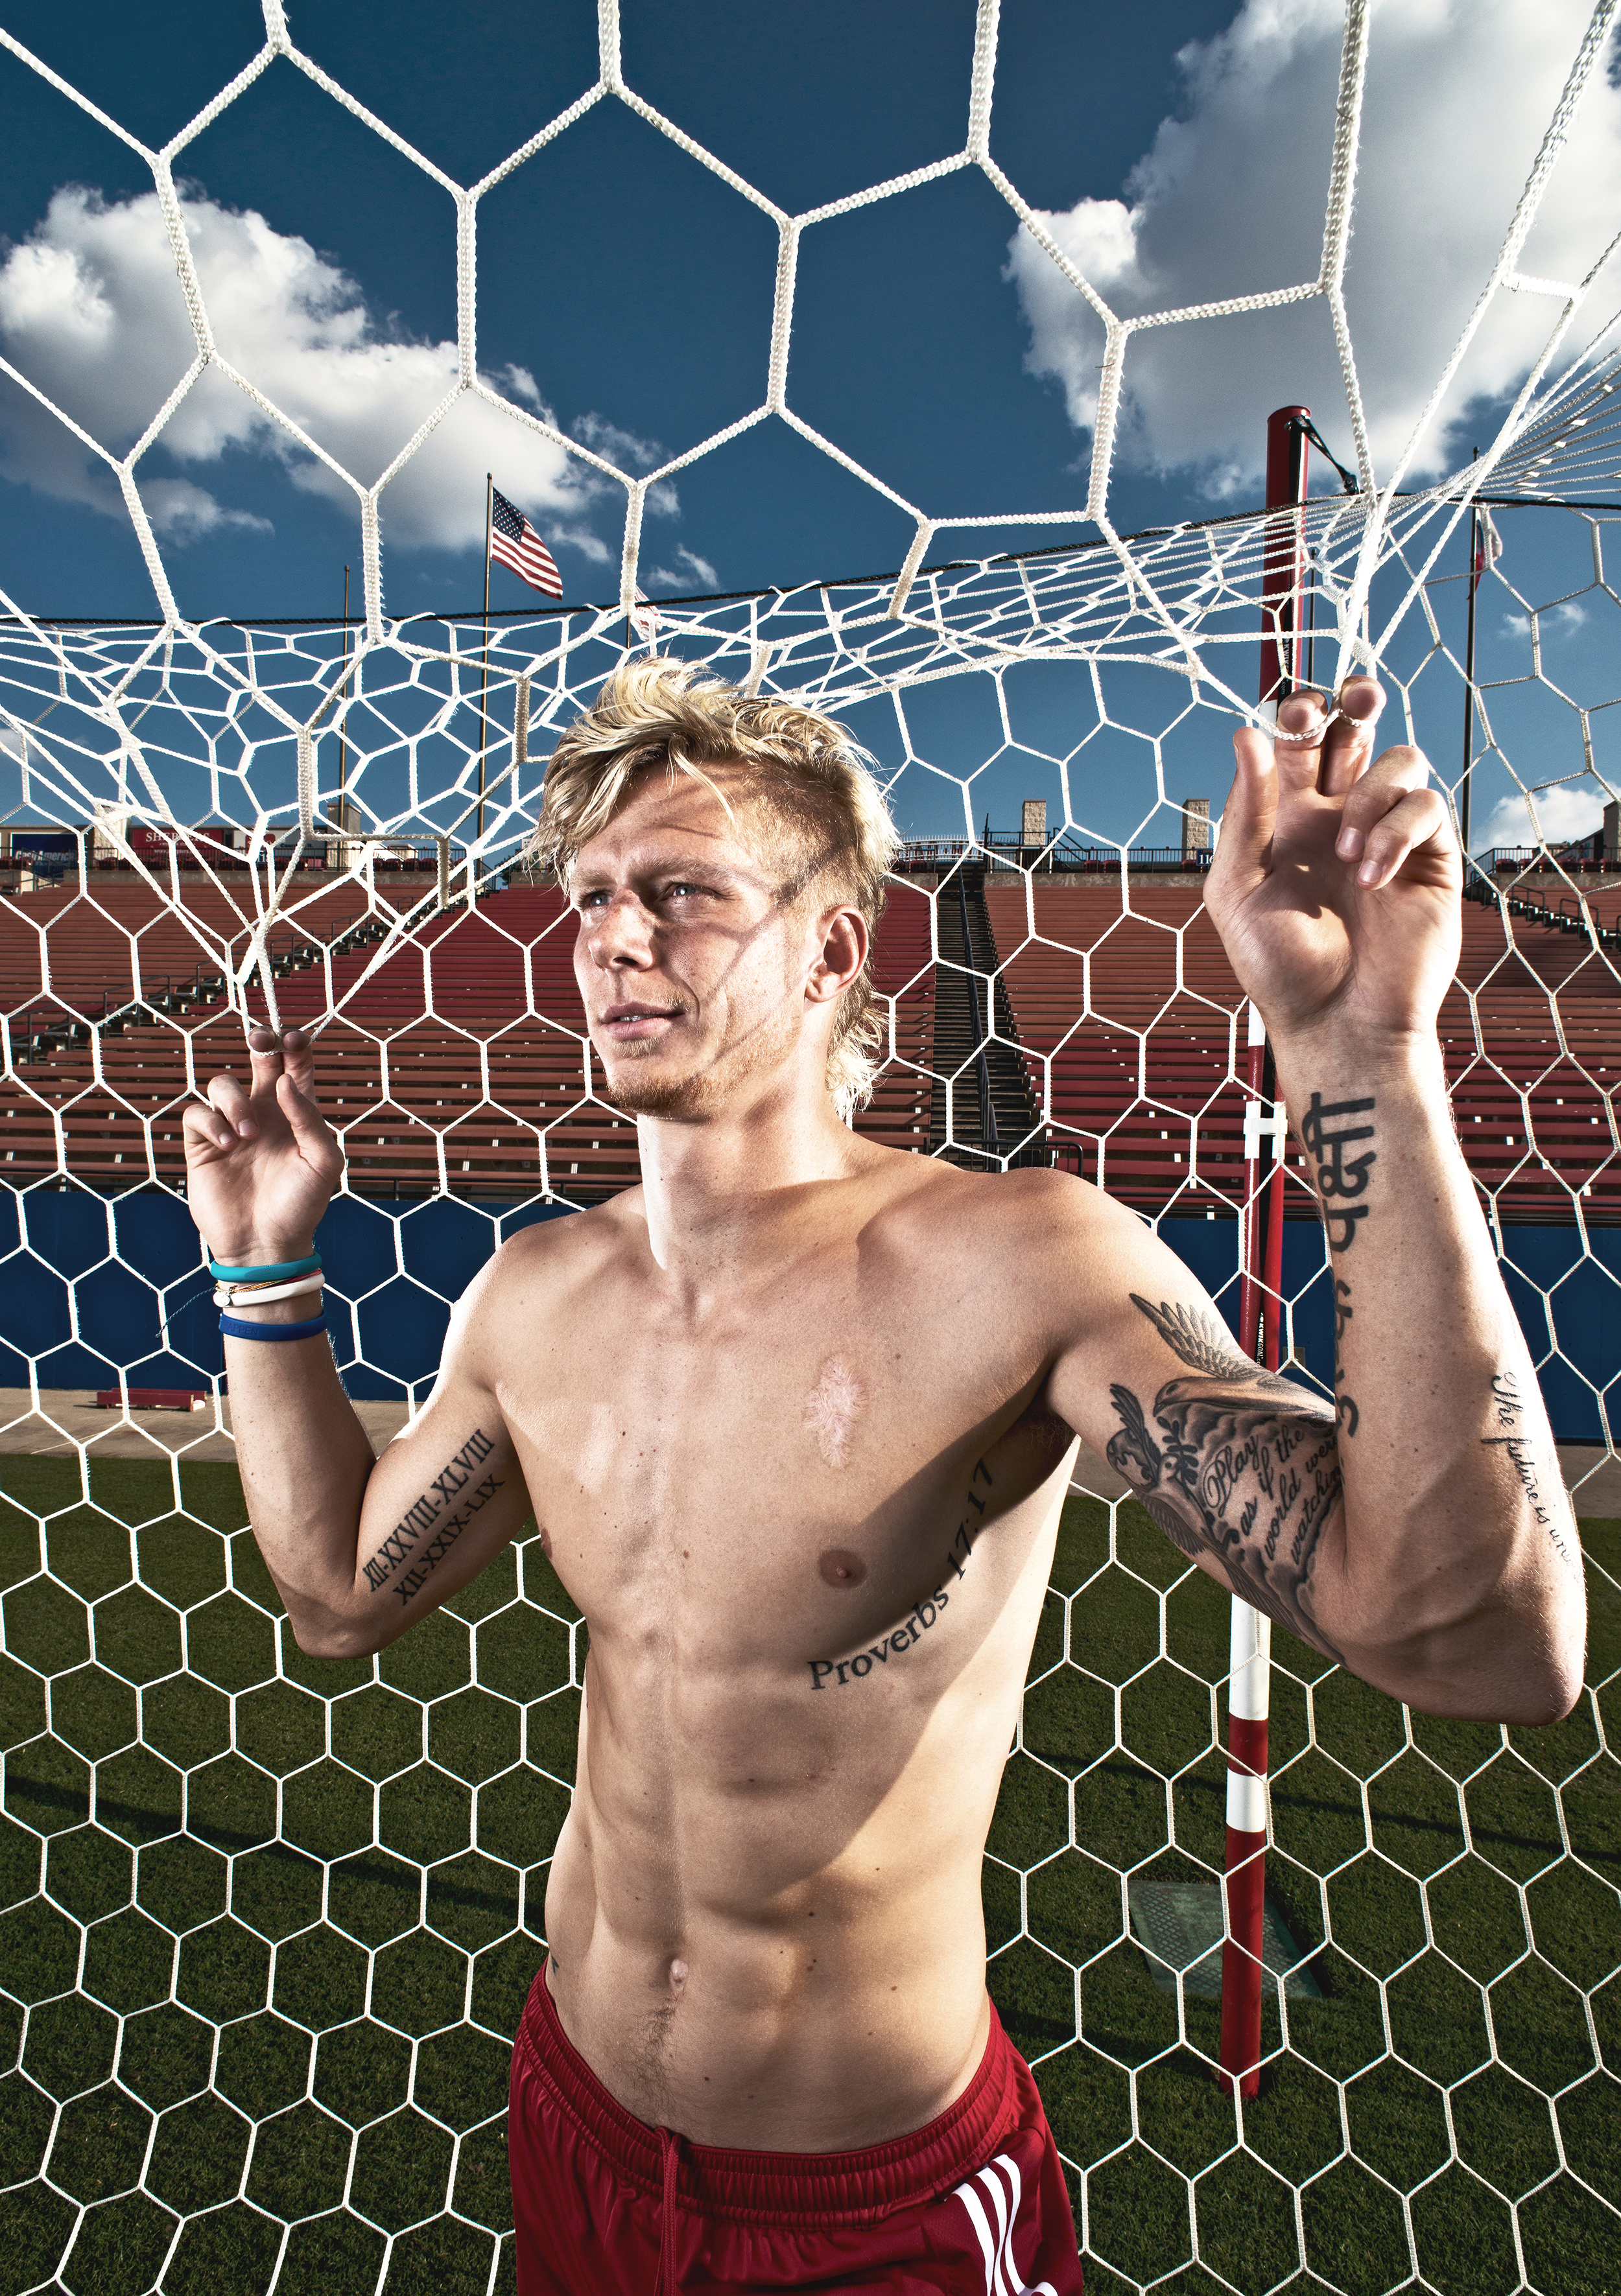  Professional soccer player Dane Brekken “Brek” Shea stands on the FC Dallas pitch in Frisco, TX.  In Texas—let alone the United States, where soccer’s near-global fandom isn’t as well appreciated, Shea, a native Texan, stood to shift the sport’s dom